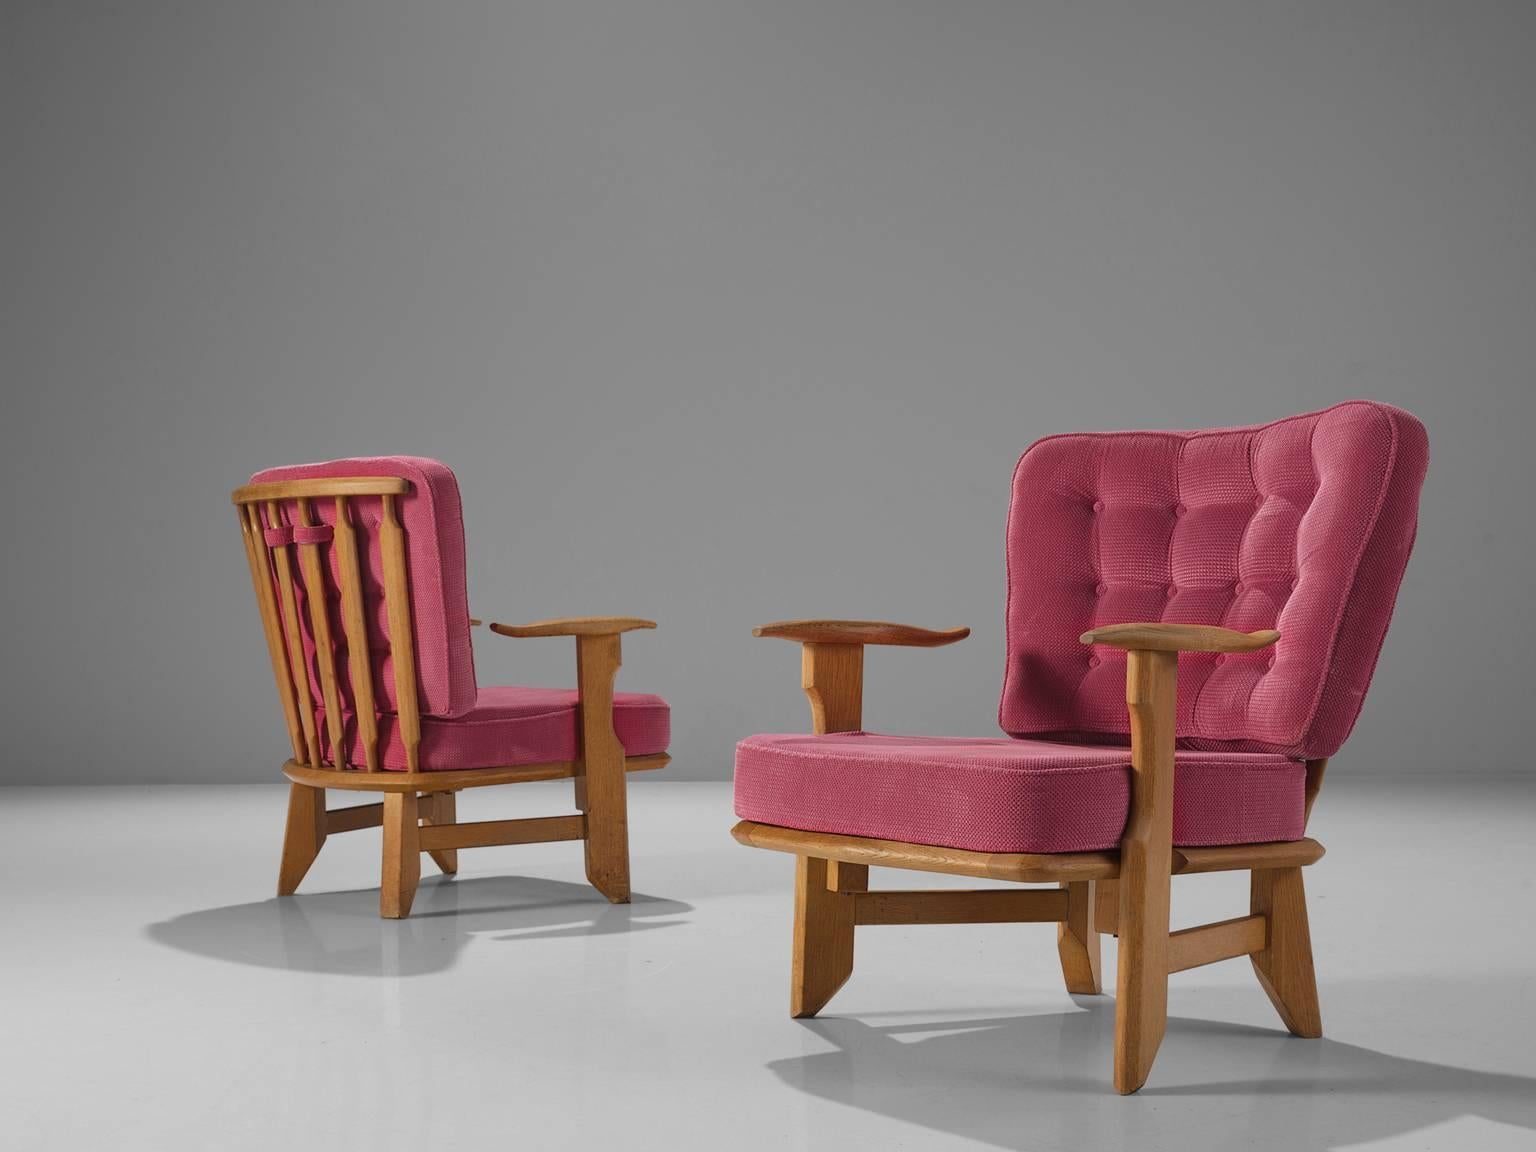 Guillerme and Chambron, pair of lounge chairs, pink fabric, oak, France, 1950s

These sculptural easy chairs are designed by Guillerme and Chambron. They are known for their high quality solid oak furniture, off which this is no exception. These